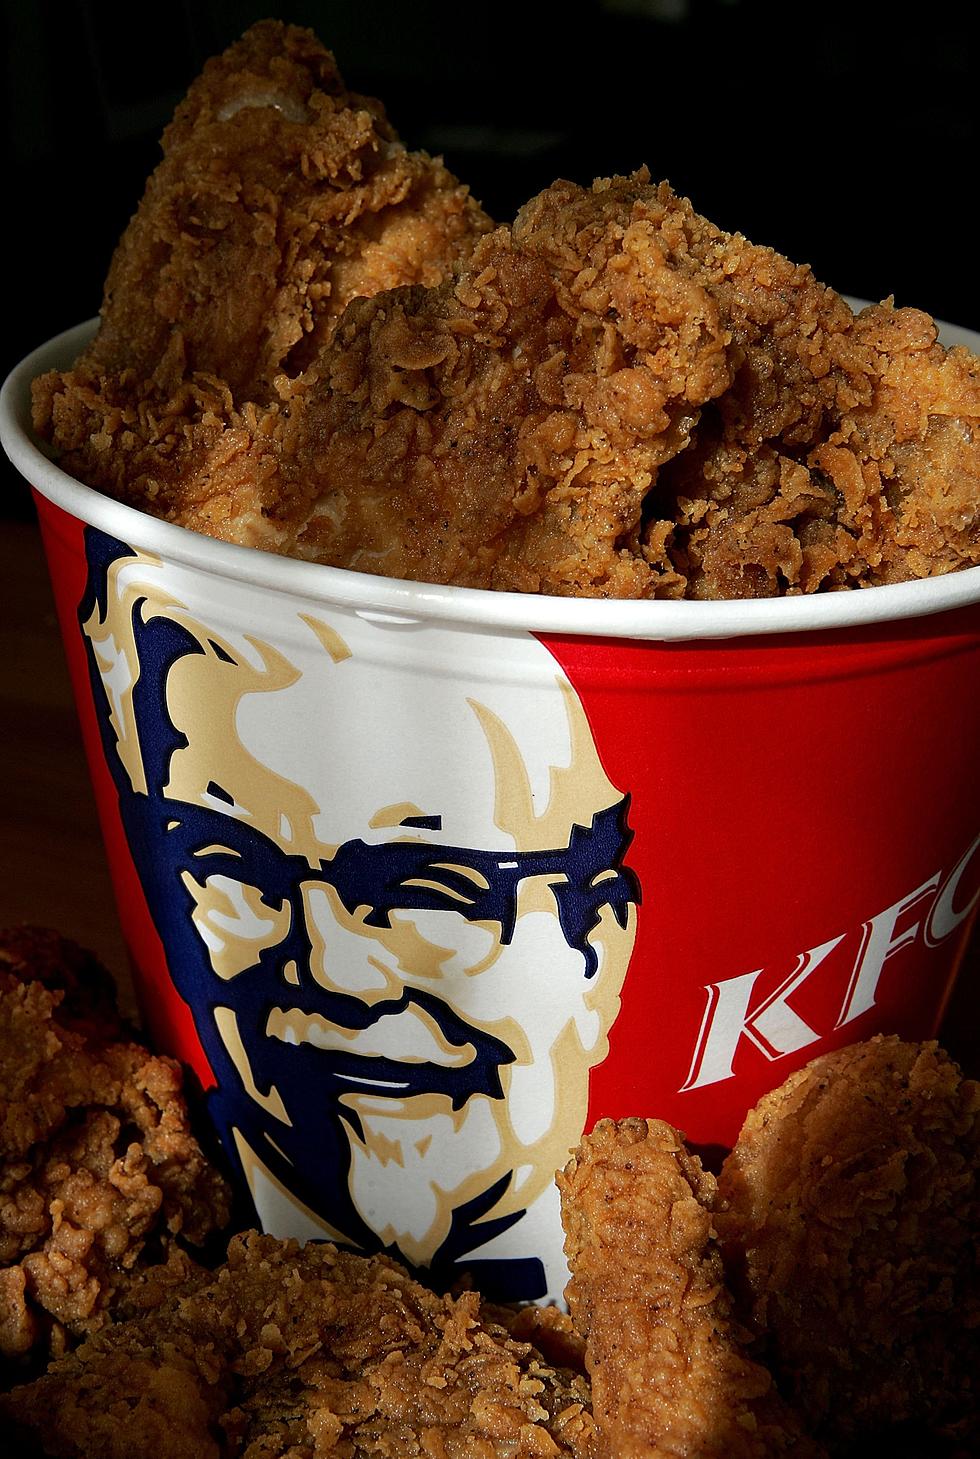 KFC Introduces A Pizza With A Different Kind Of Crust